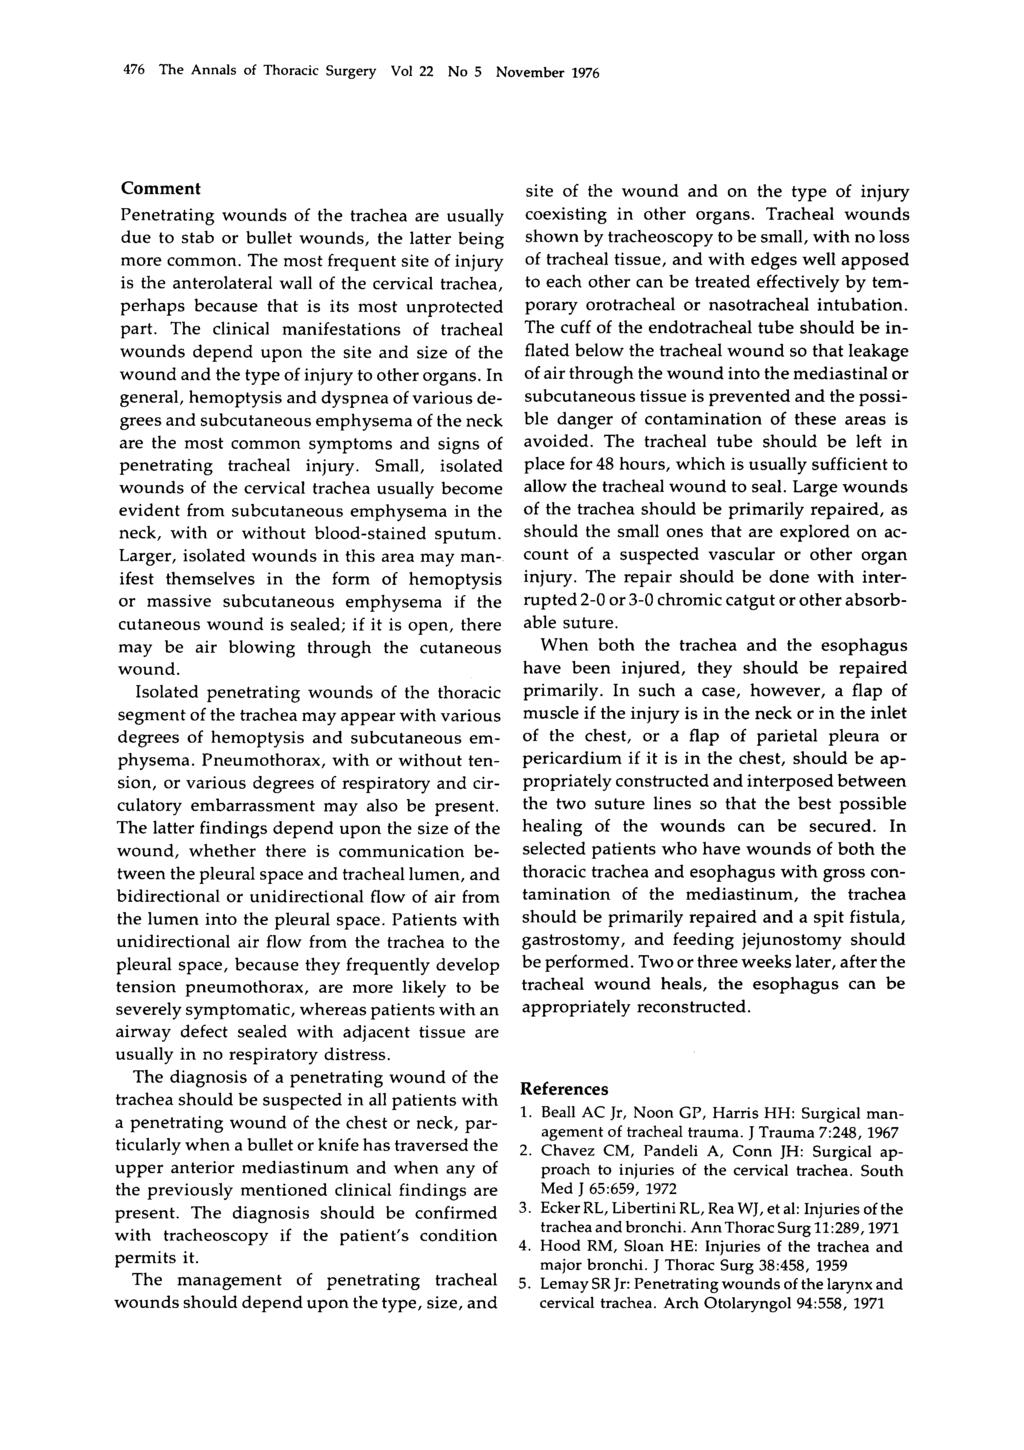 476 The Annals of Surgery Vol 22 No 5 November 1976 Comment Penetrating wounds of the trachea are usually due to stab or bullet wounds, the latter being more common.